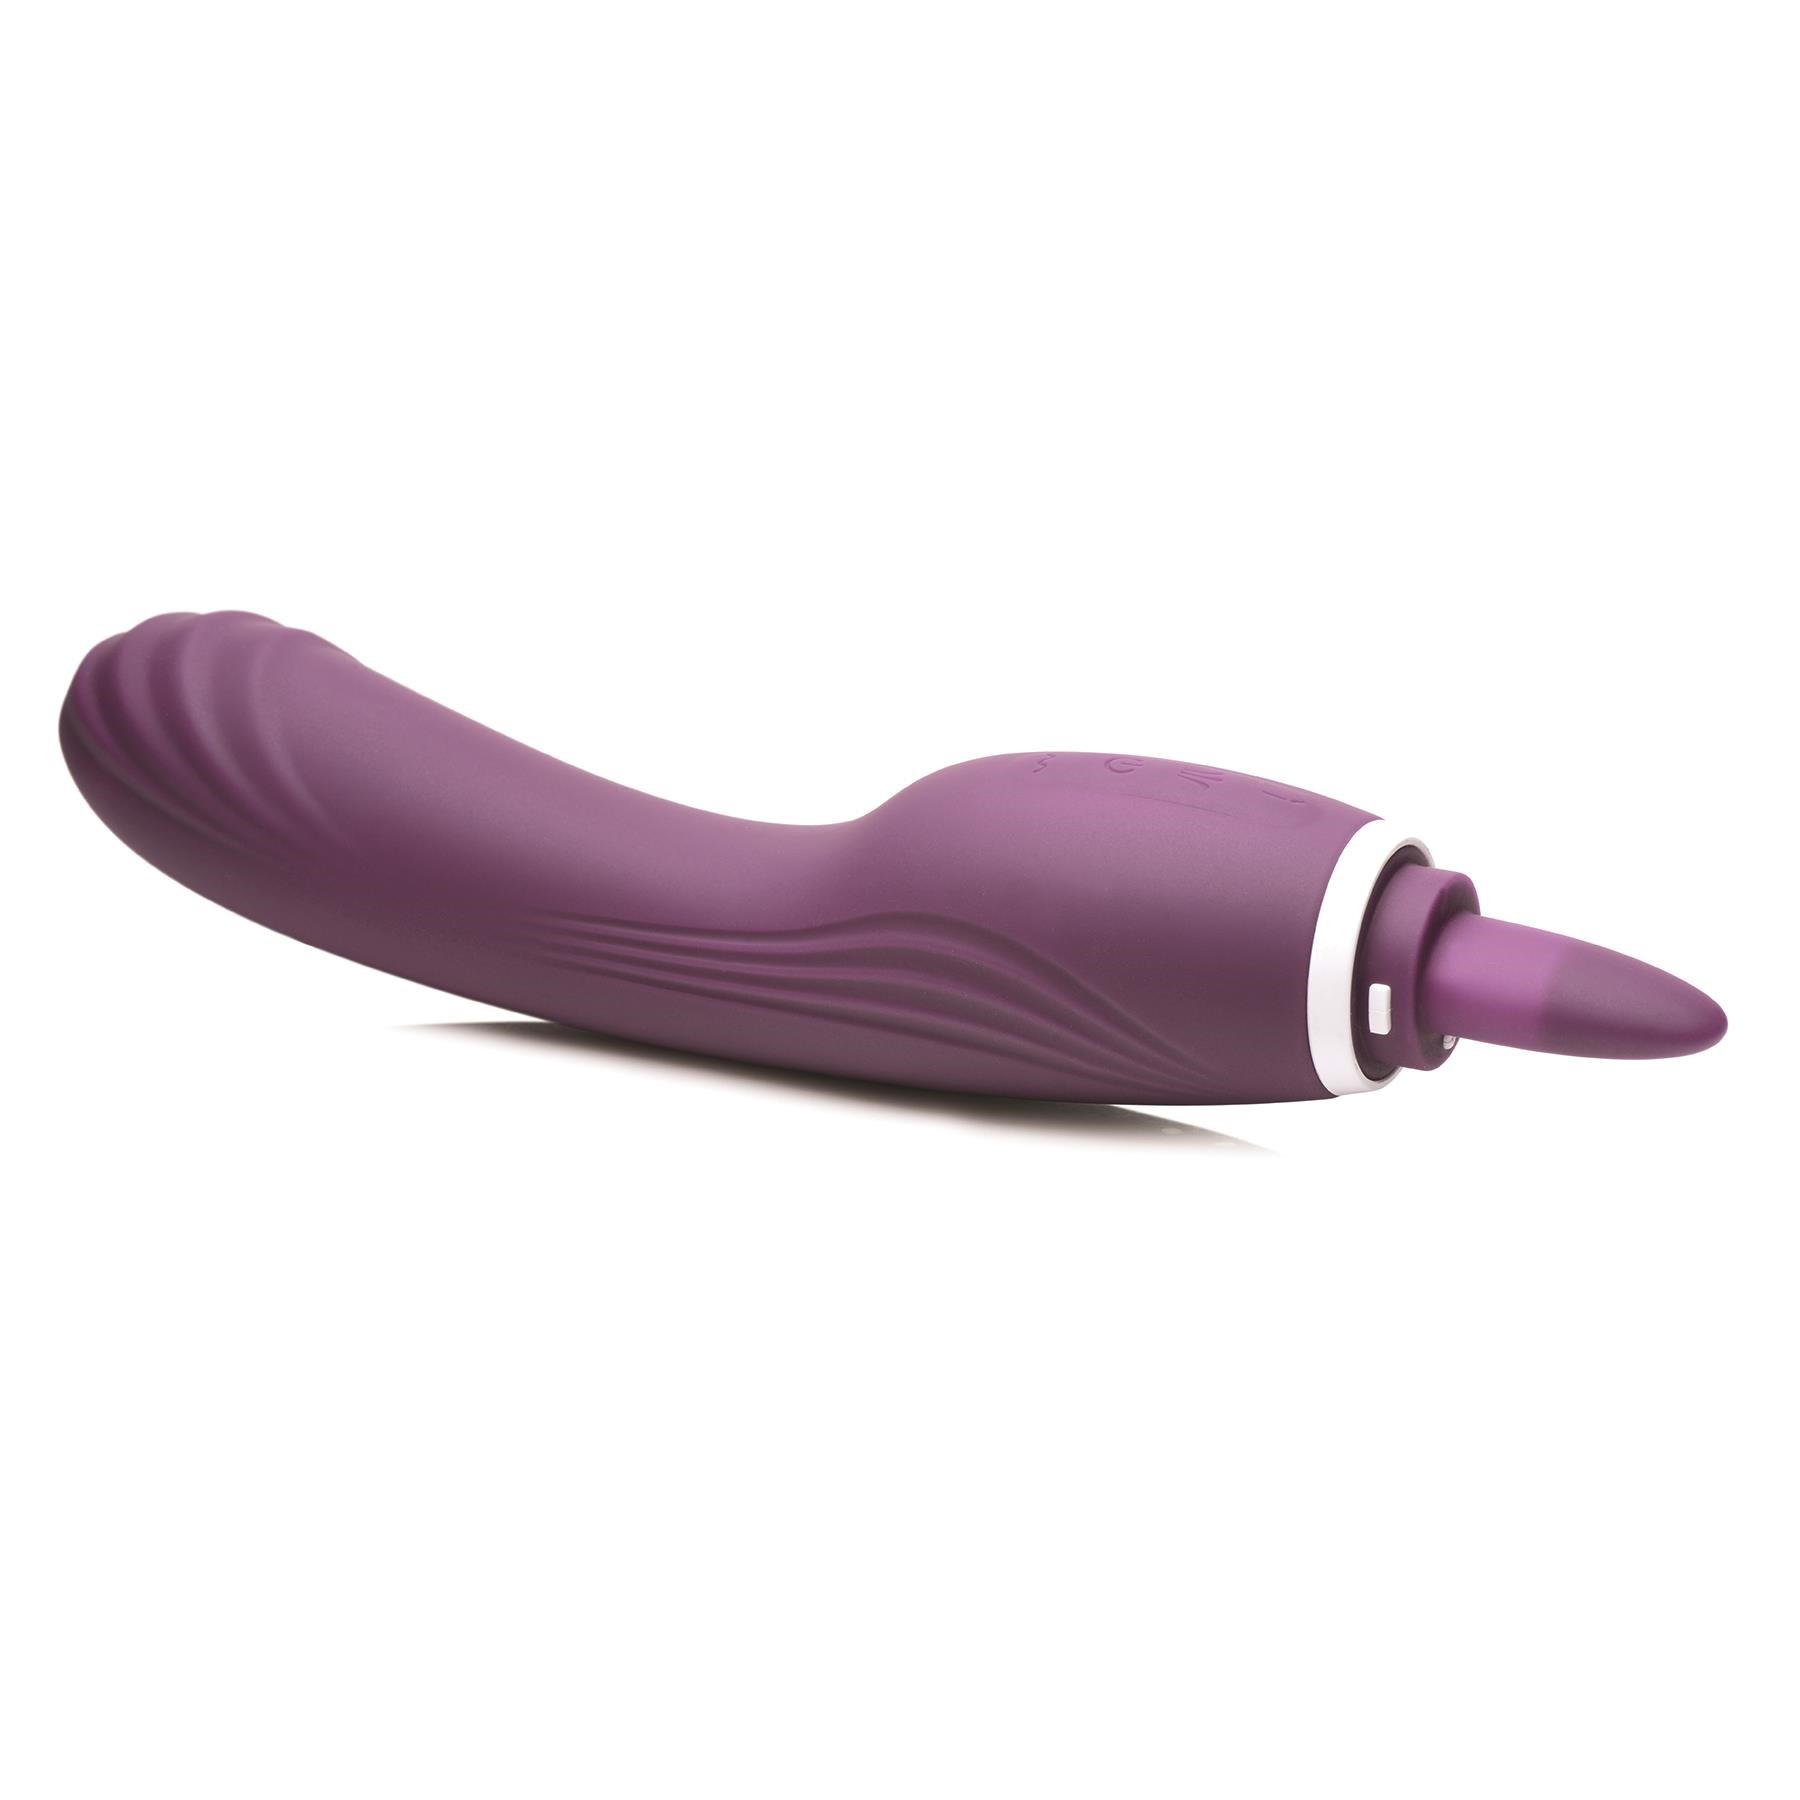 Shegasm Lickgasm Vibrating Pussy Pump - Product Shot without Cups #2